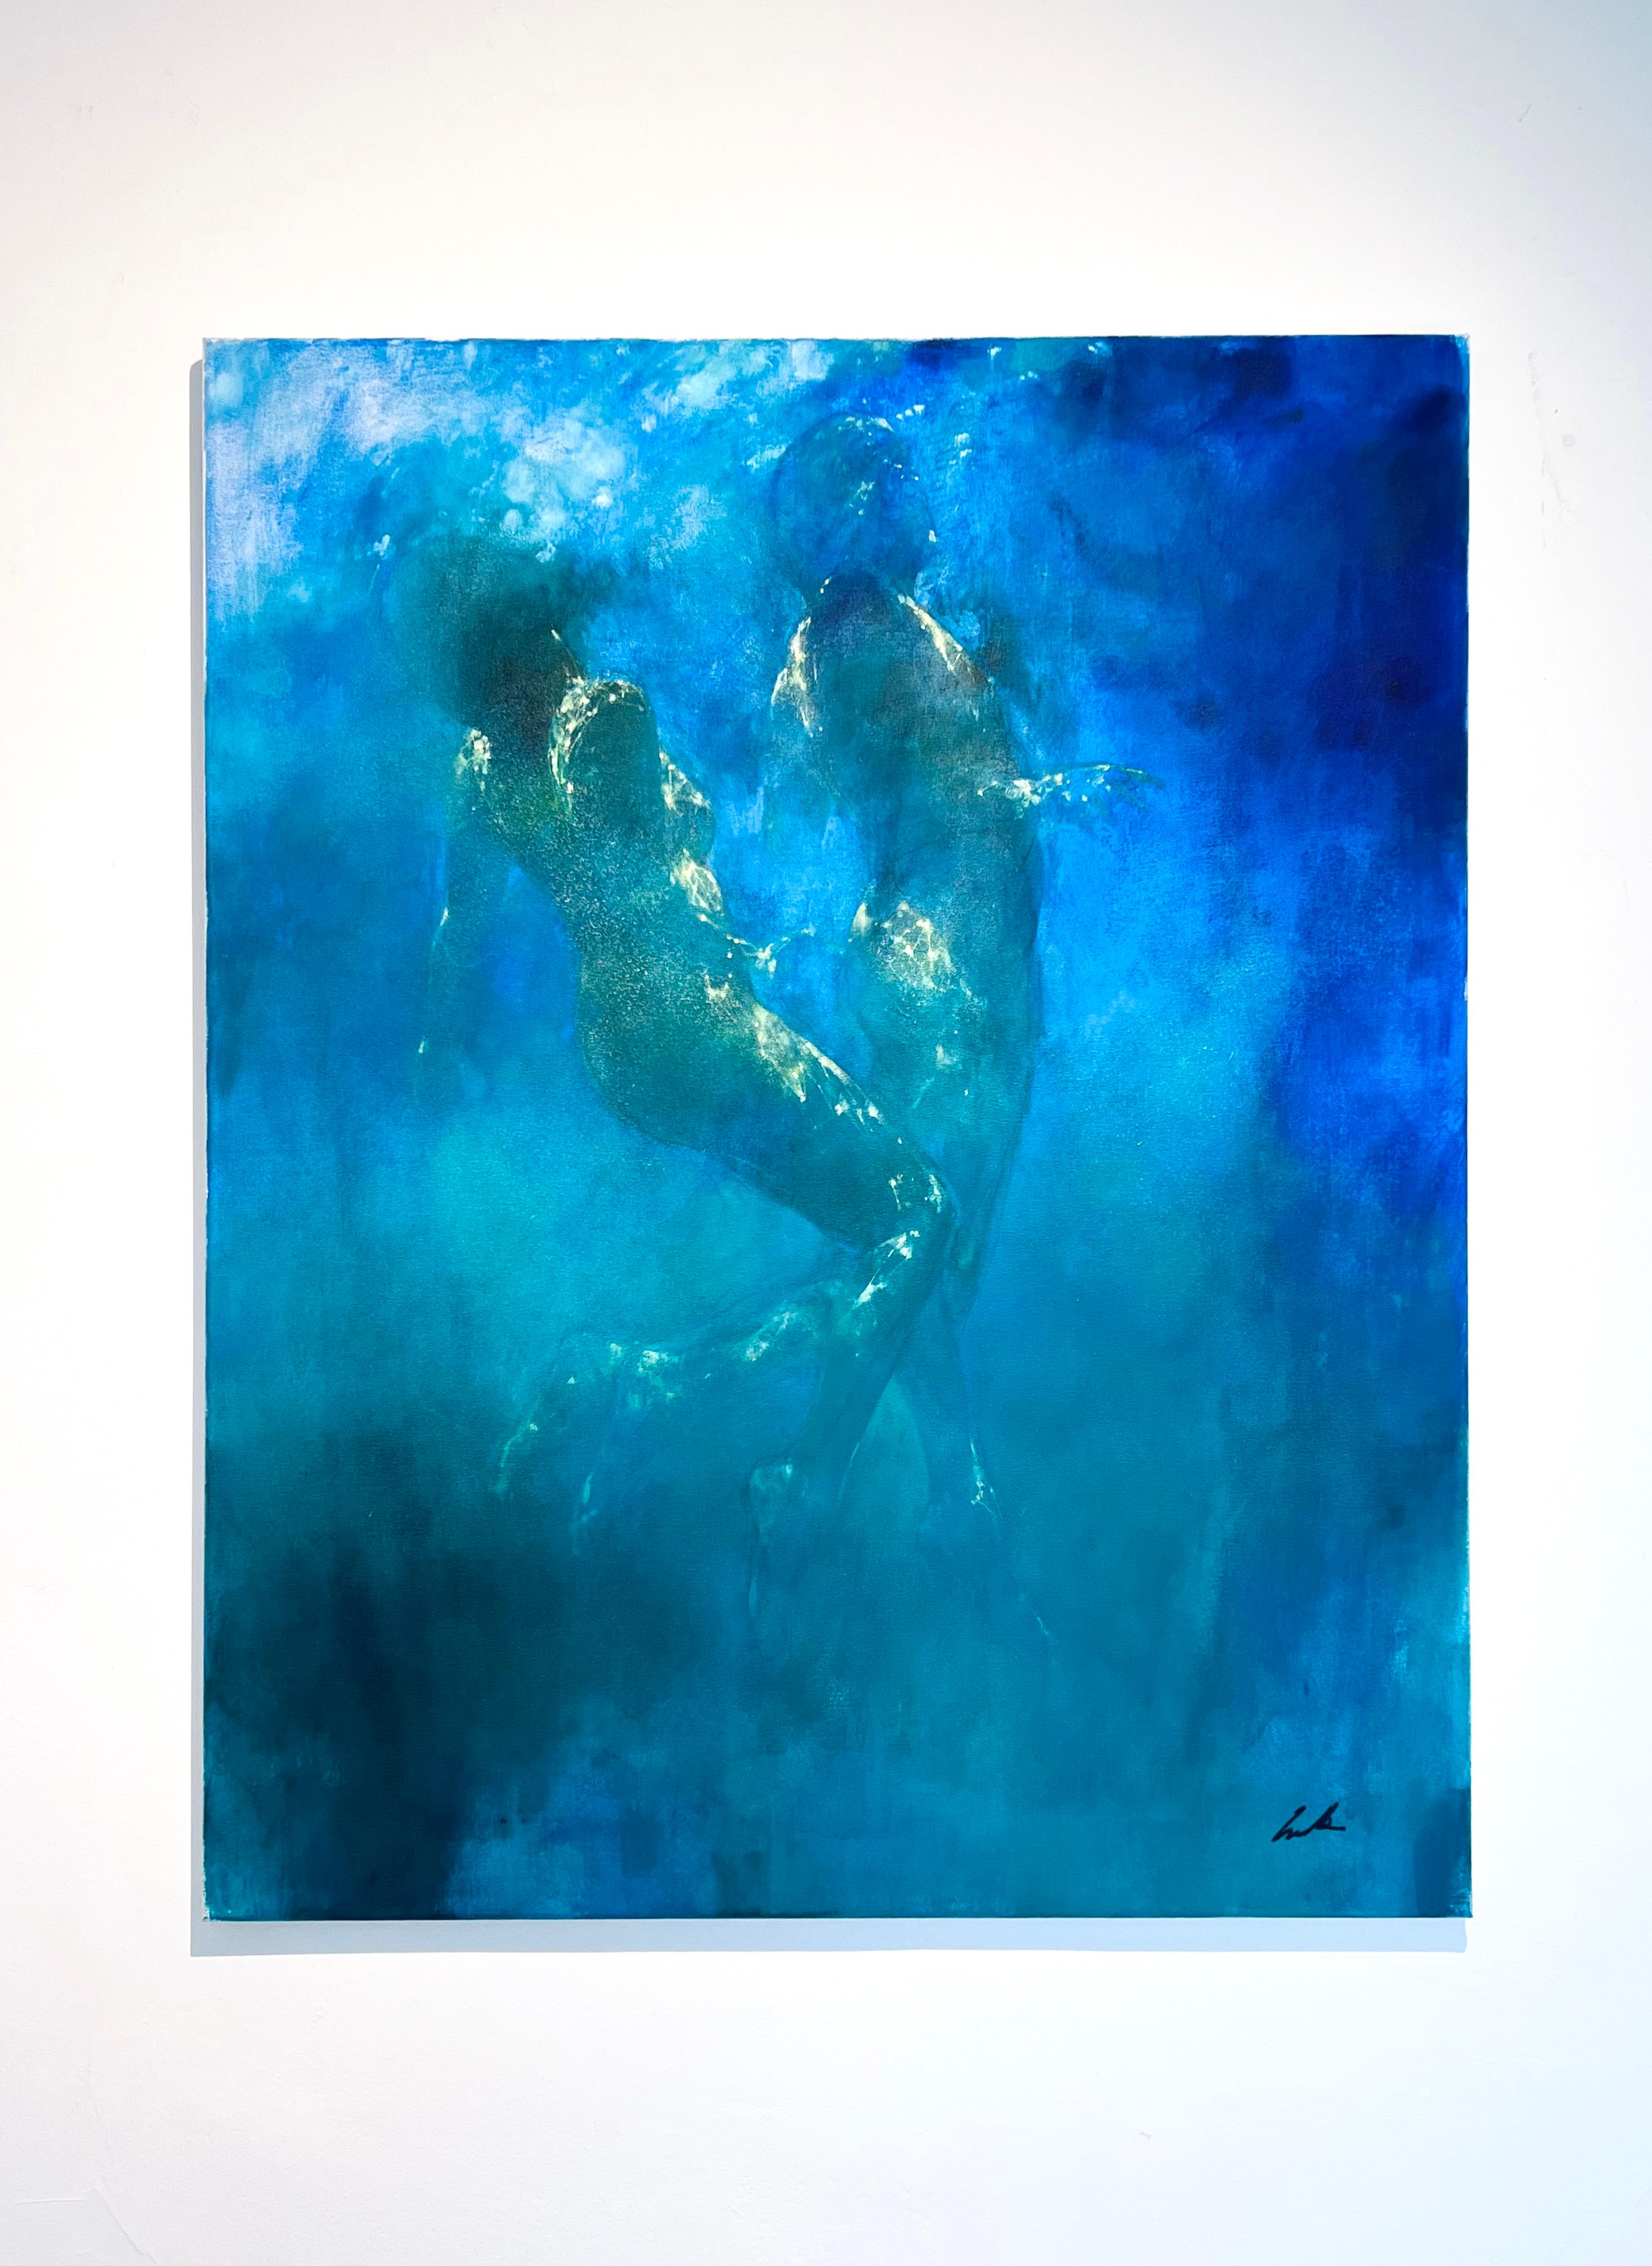  Aqua Serenity - abstract representation of the human form - underwater painting - Painting by Bill Bate